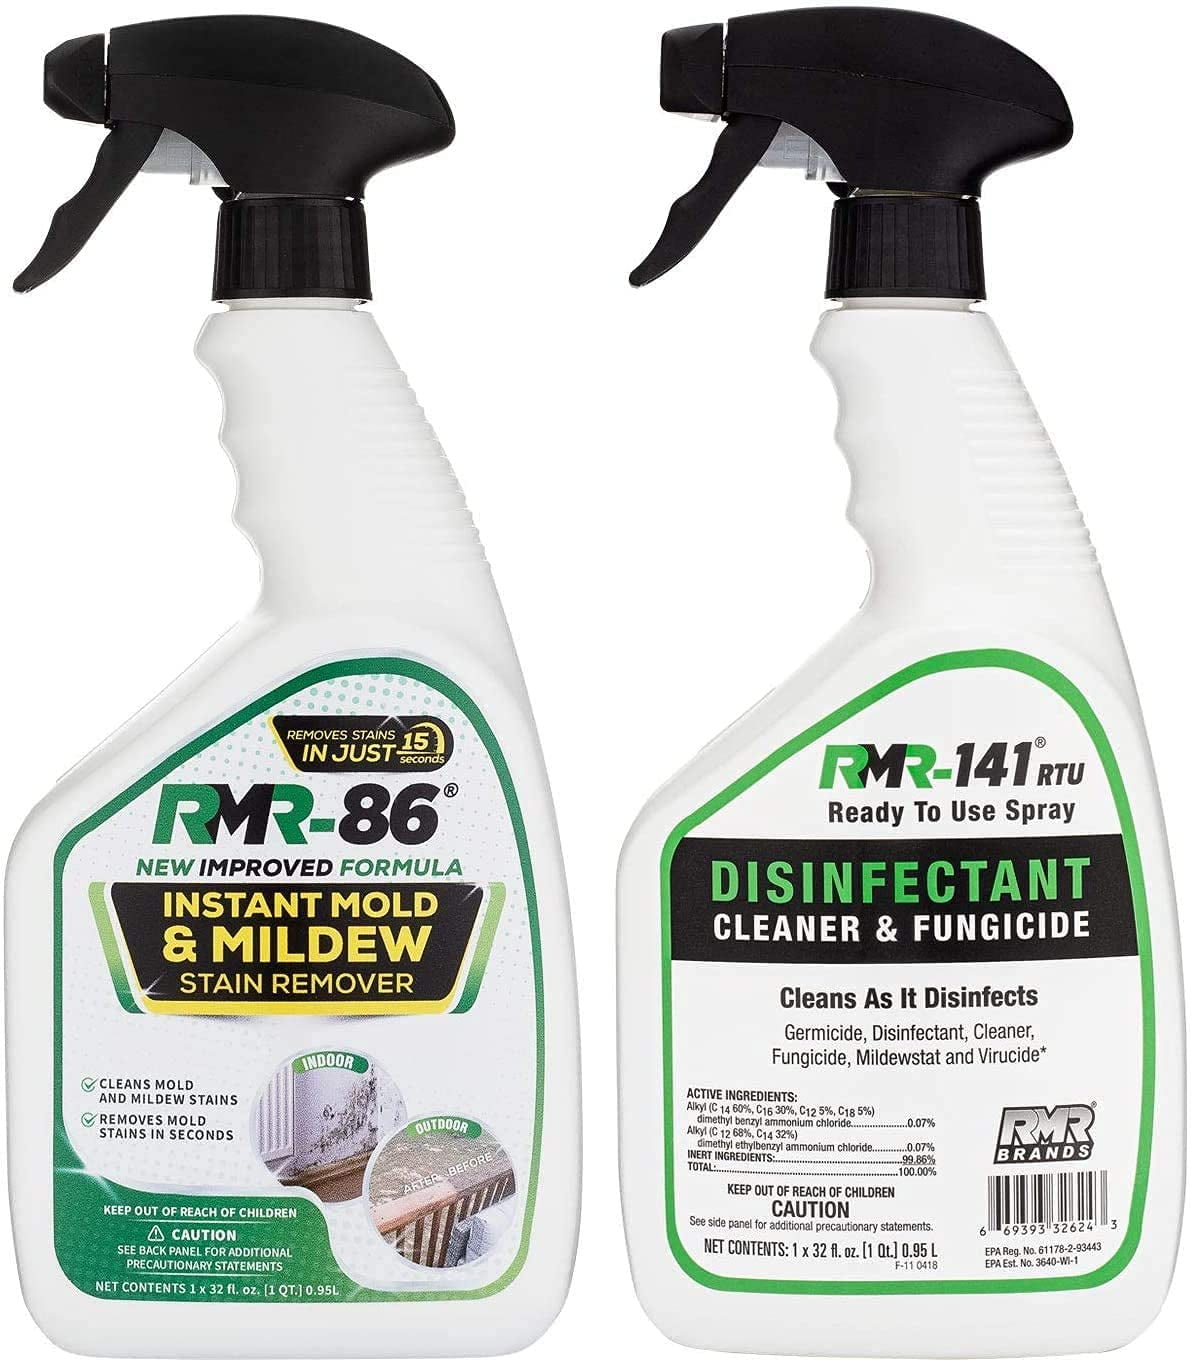 RMR Brands RMR - Tub and Tile Cleaner Mold & Mildew Stain Remover Industrial-Strength No-Scrub Foam Cleaner Modern Orchard Scent 32 fl oz